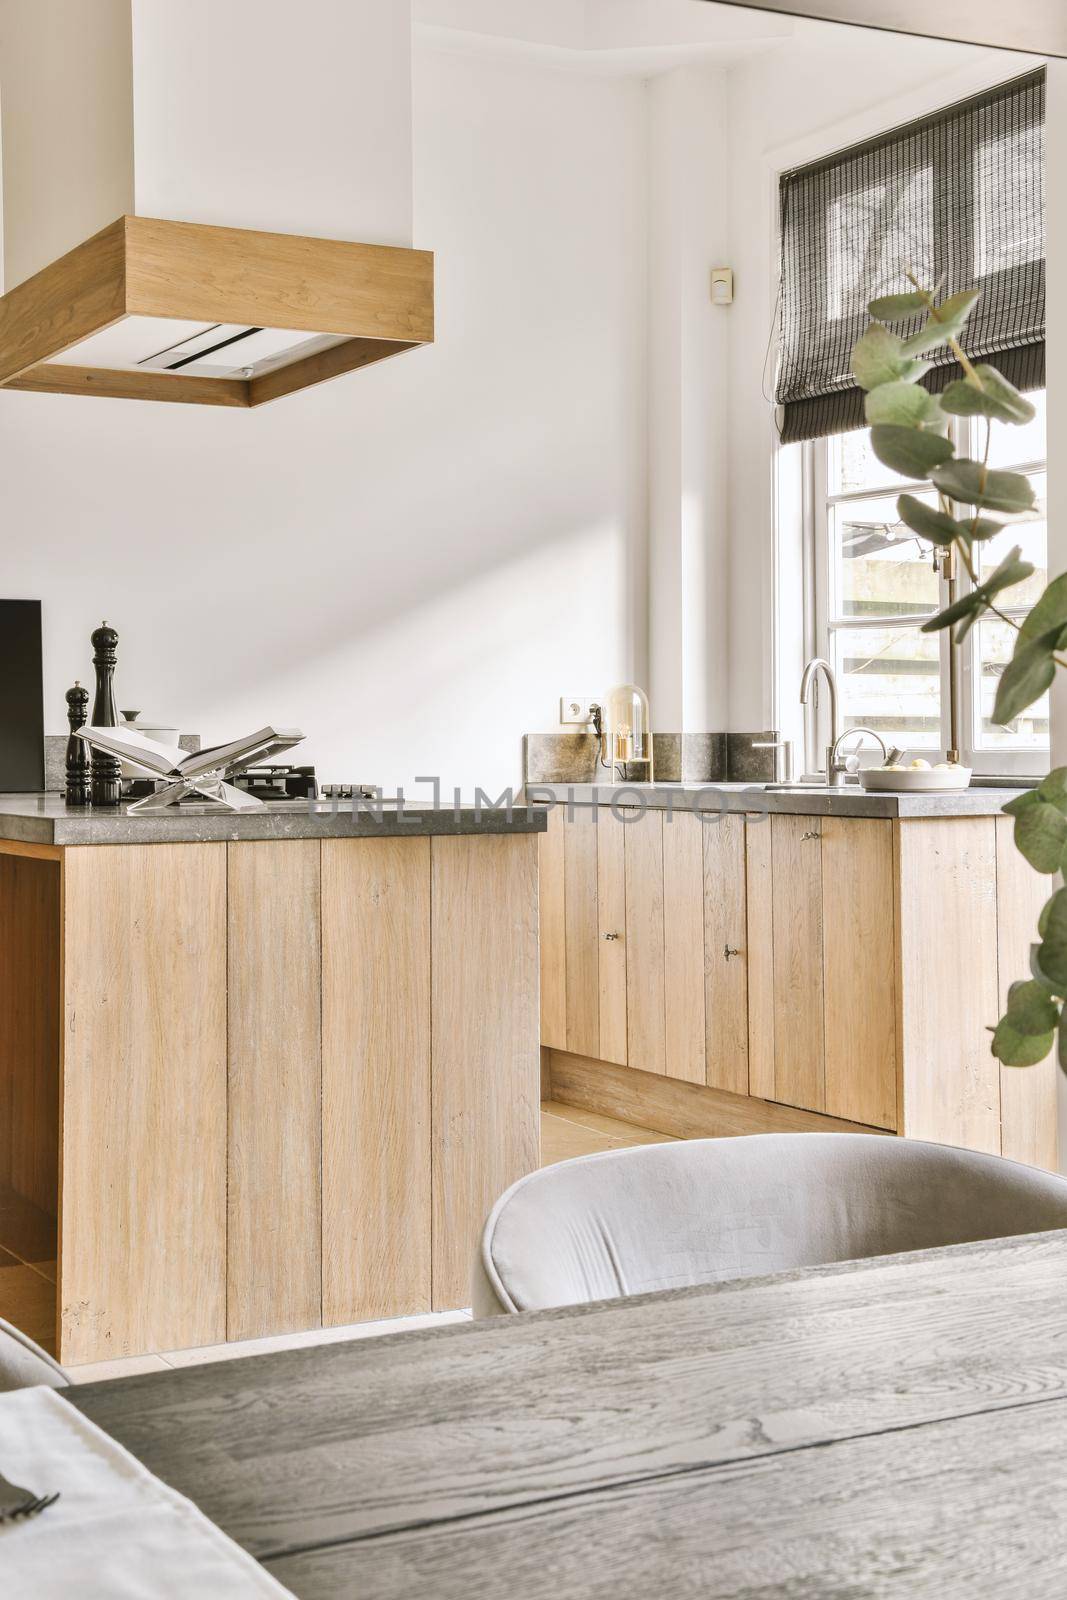 The interior of a spacious, bright kitchen by casamedia